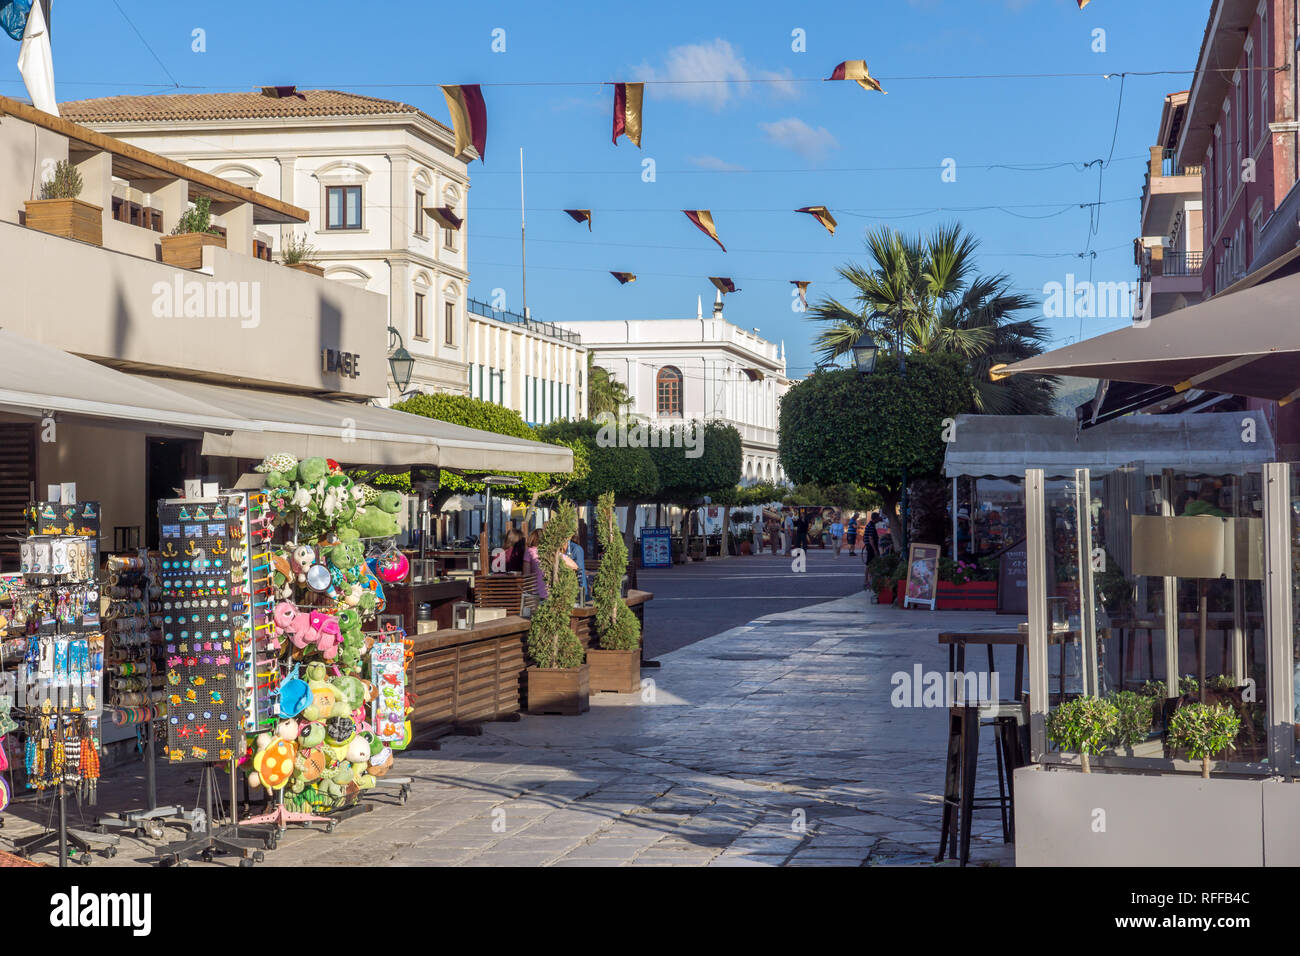 Zante Greece Zakynthos Town Street High Resolution Stock Photography and  Images - Alamy